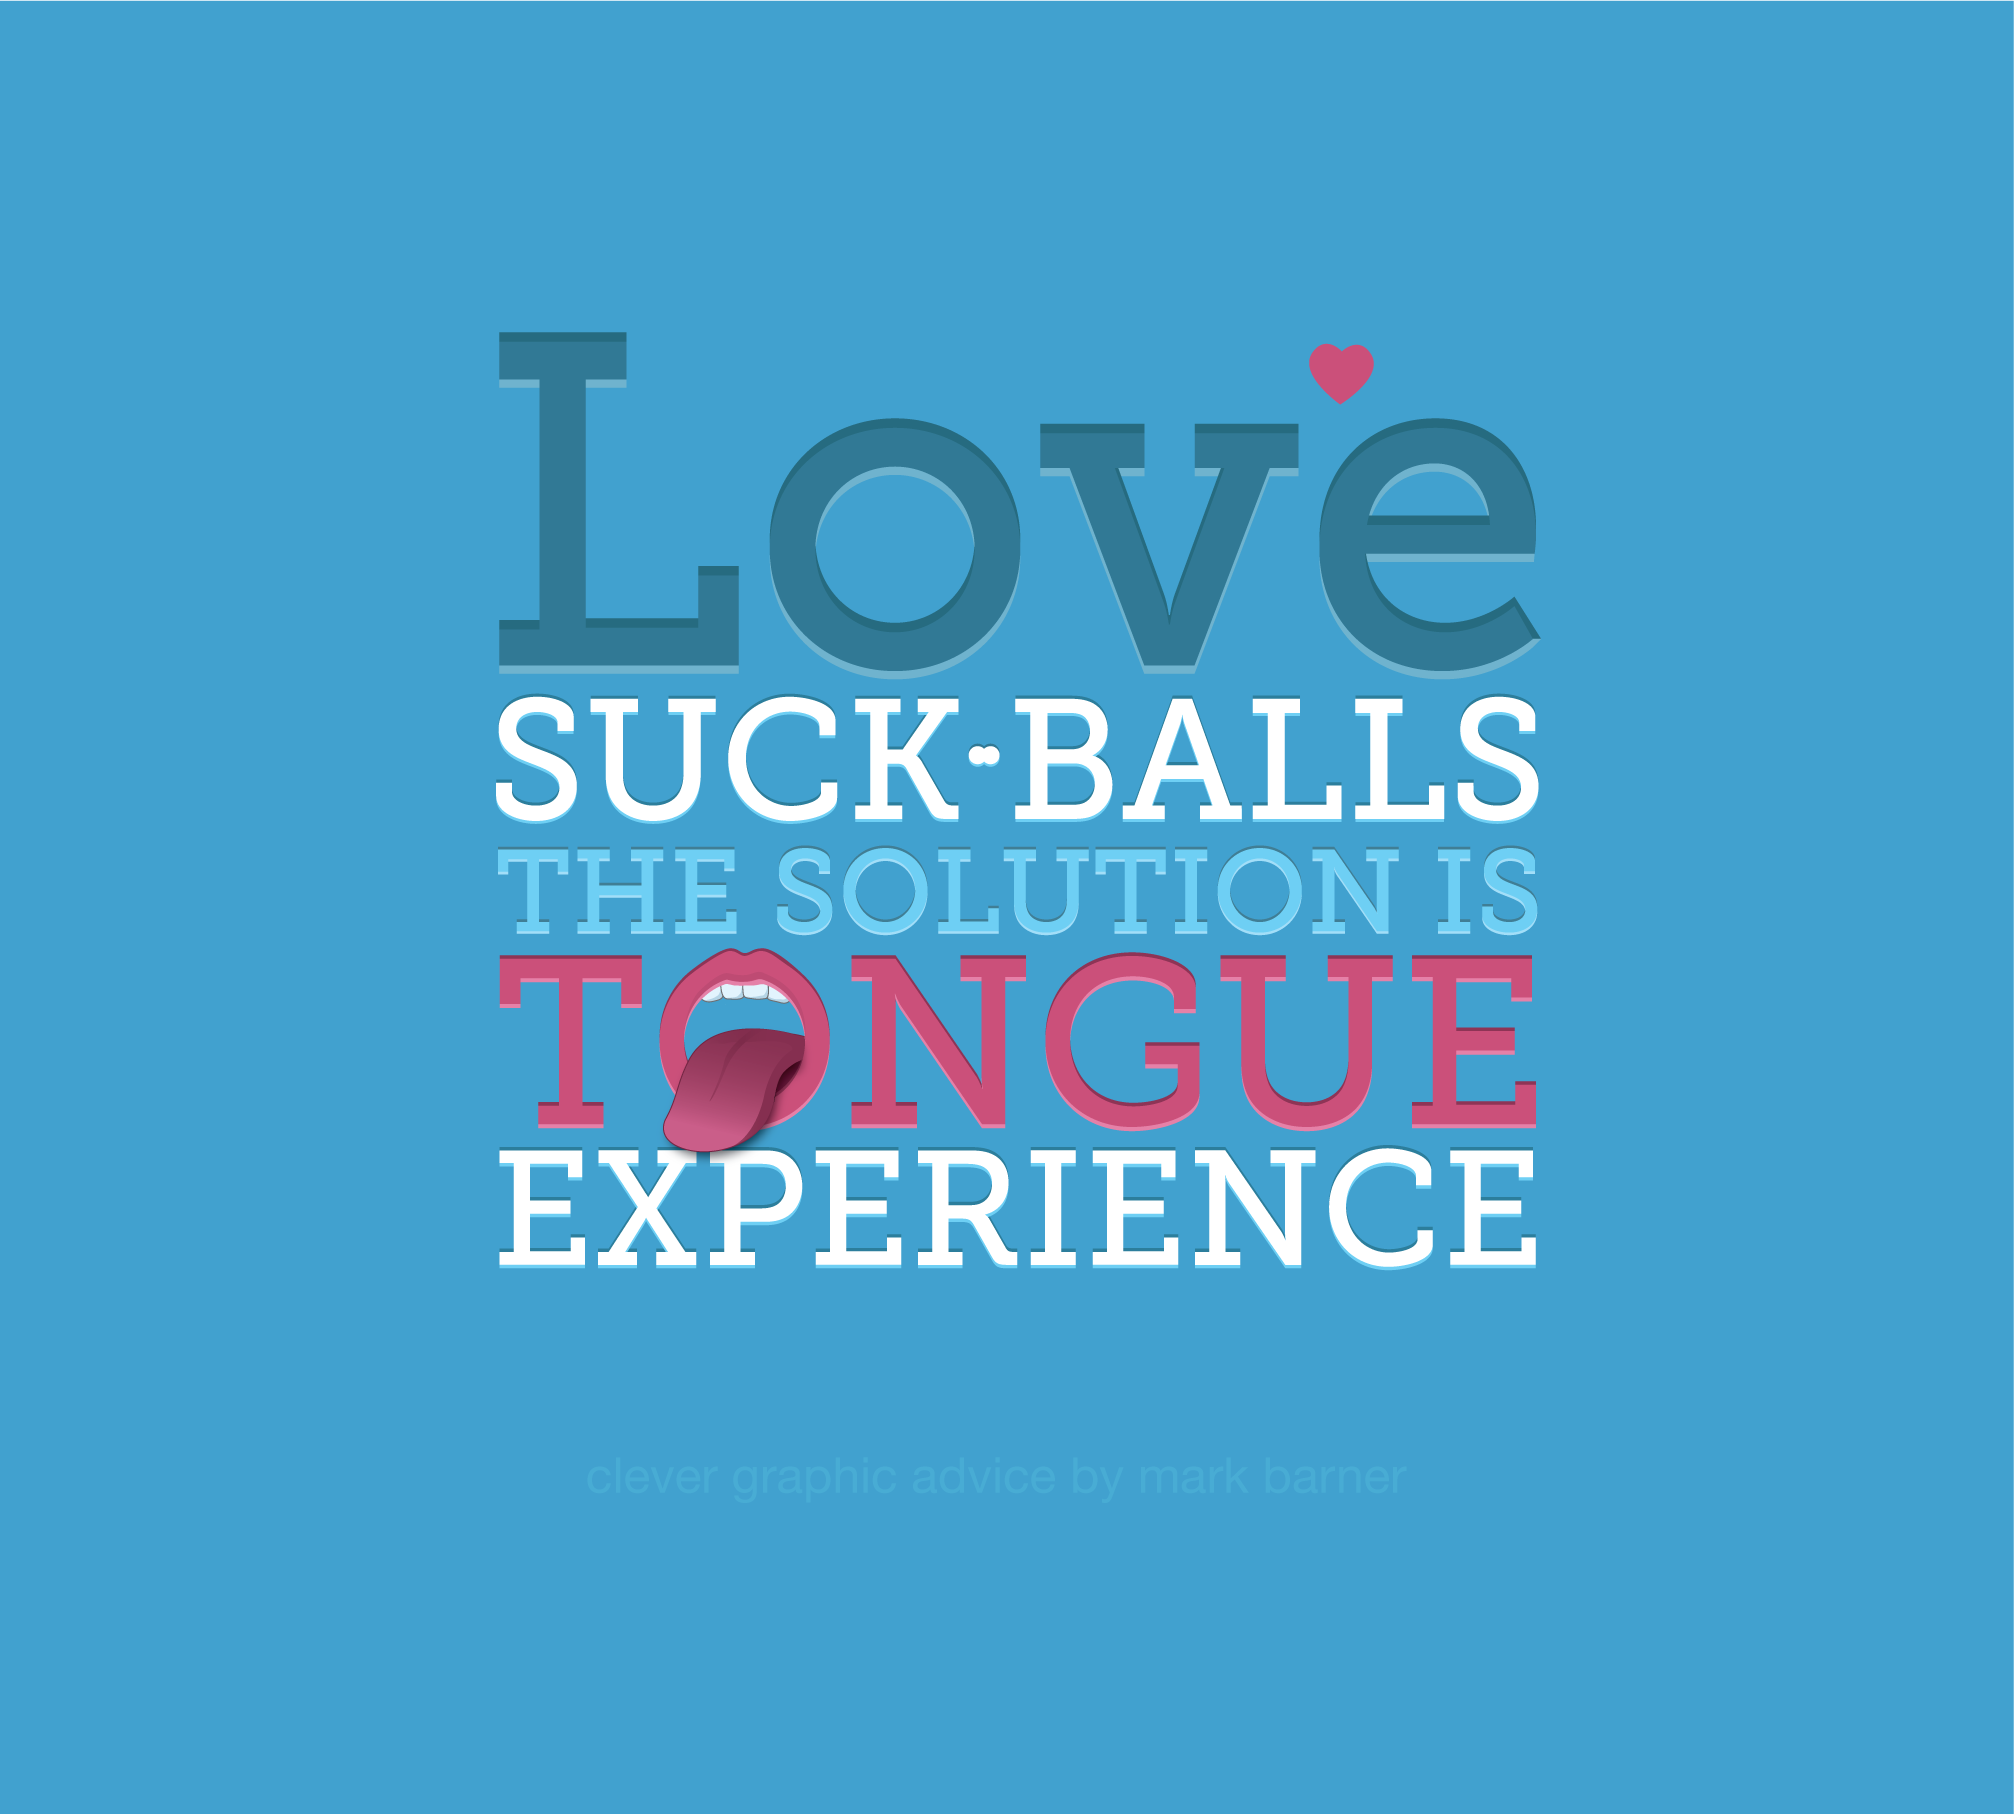 Love suck balls the solution is tongue experience - clever graphic design and advice by Mark Barner